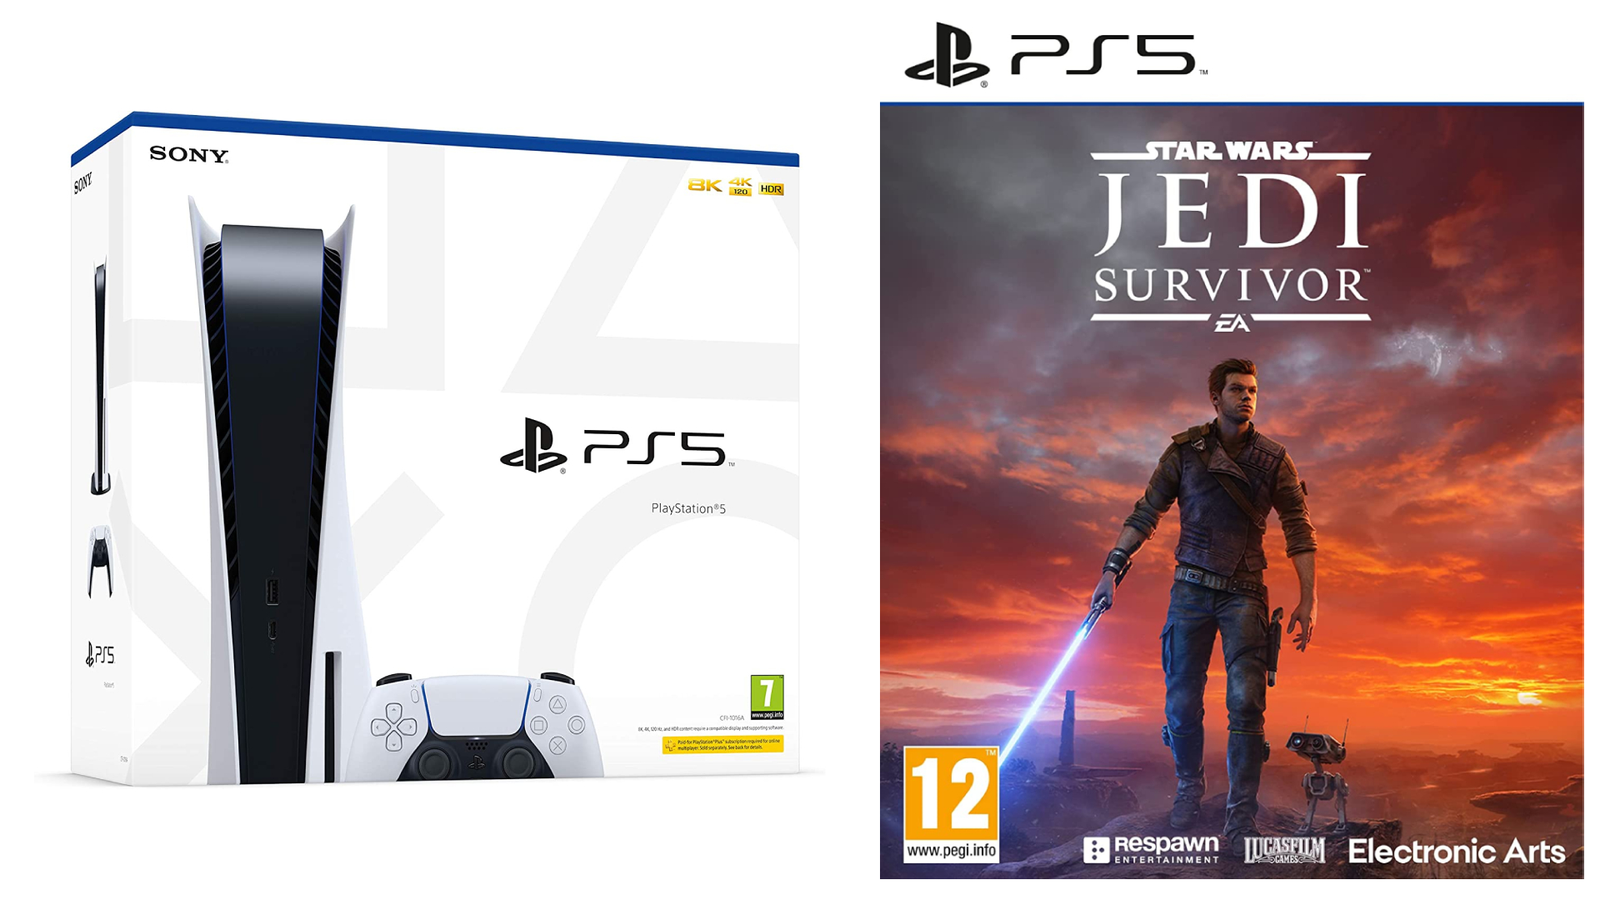 The new PlayStation 5 + Star Wars Jedi: Survivor bundle is available now  at, playstation 5 amazon